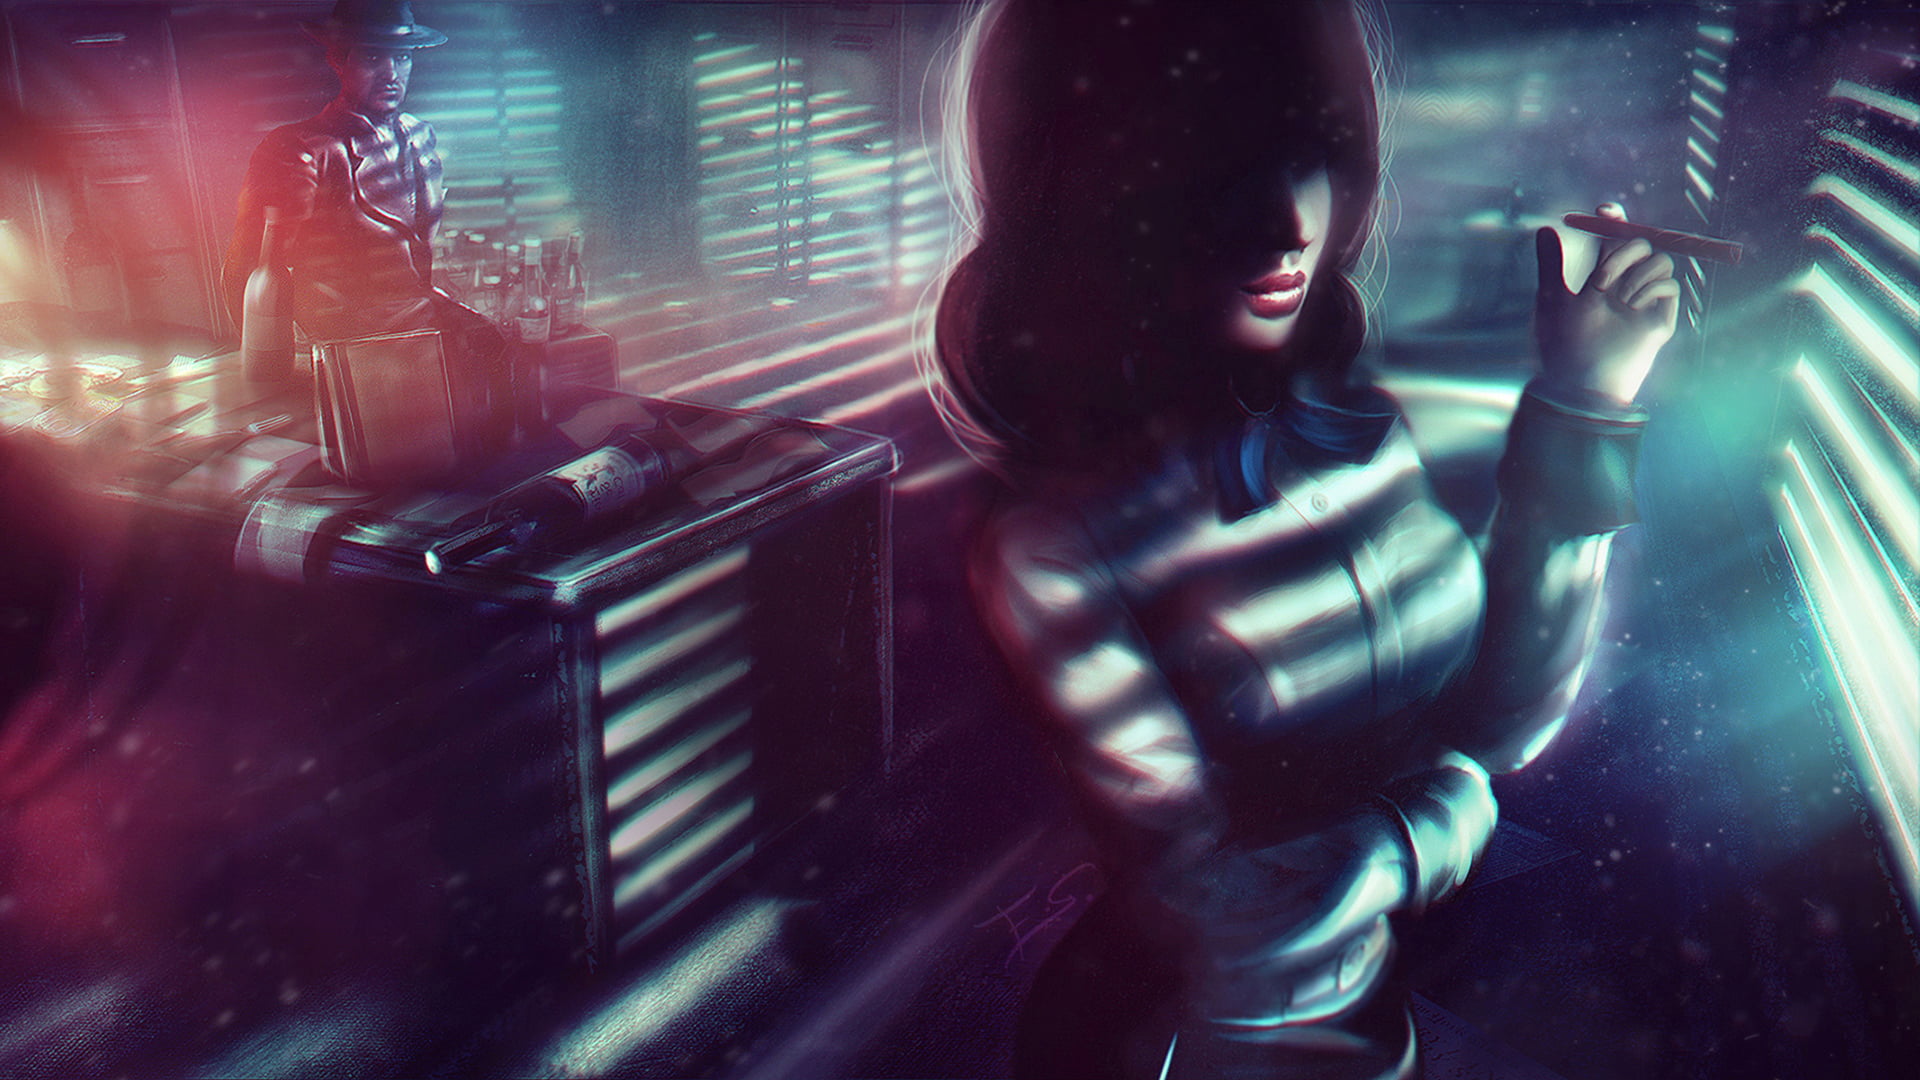 woman holding cigarette animated character wallpaper, BioShock